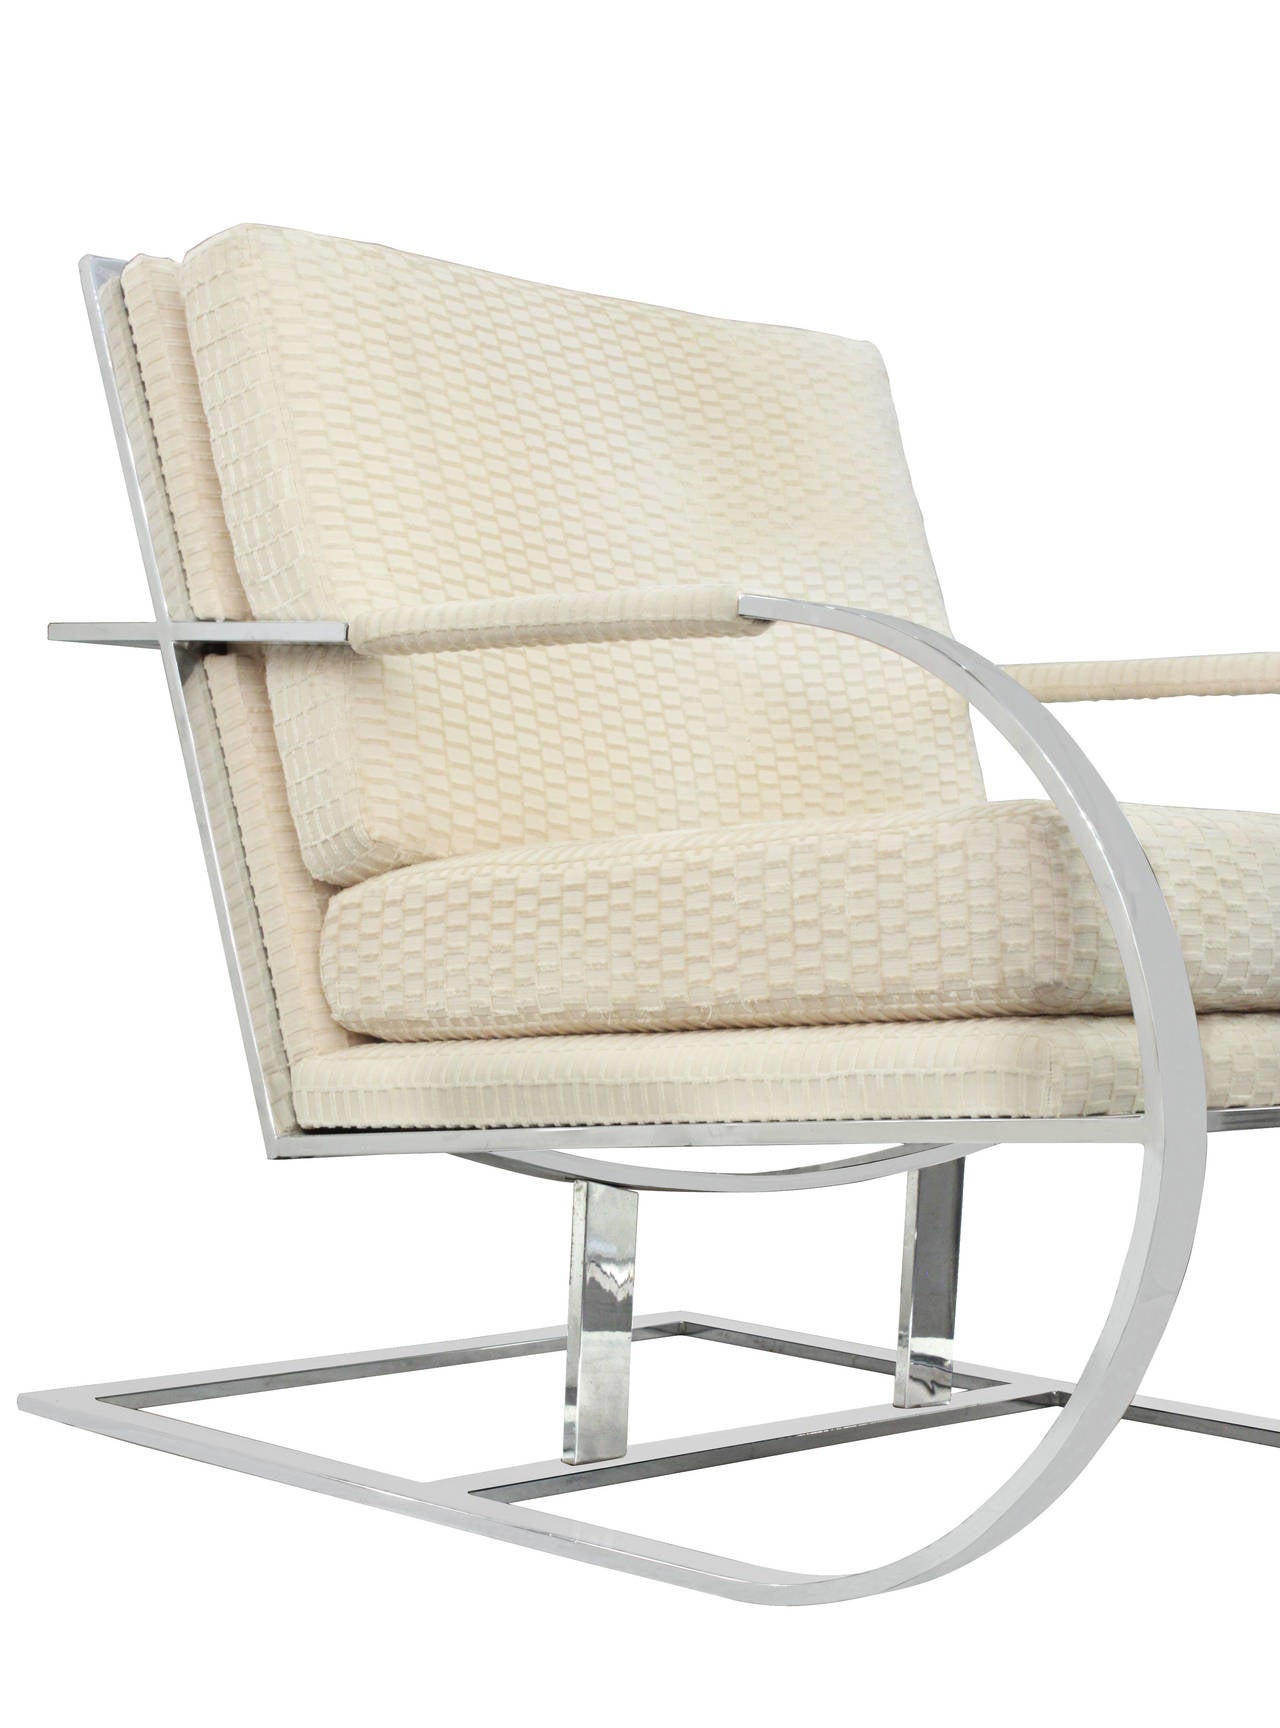 American Cantilevered Lounge Chair with Frame in Chrome by Milo Baughman